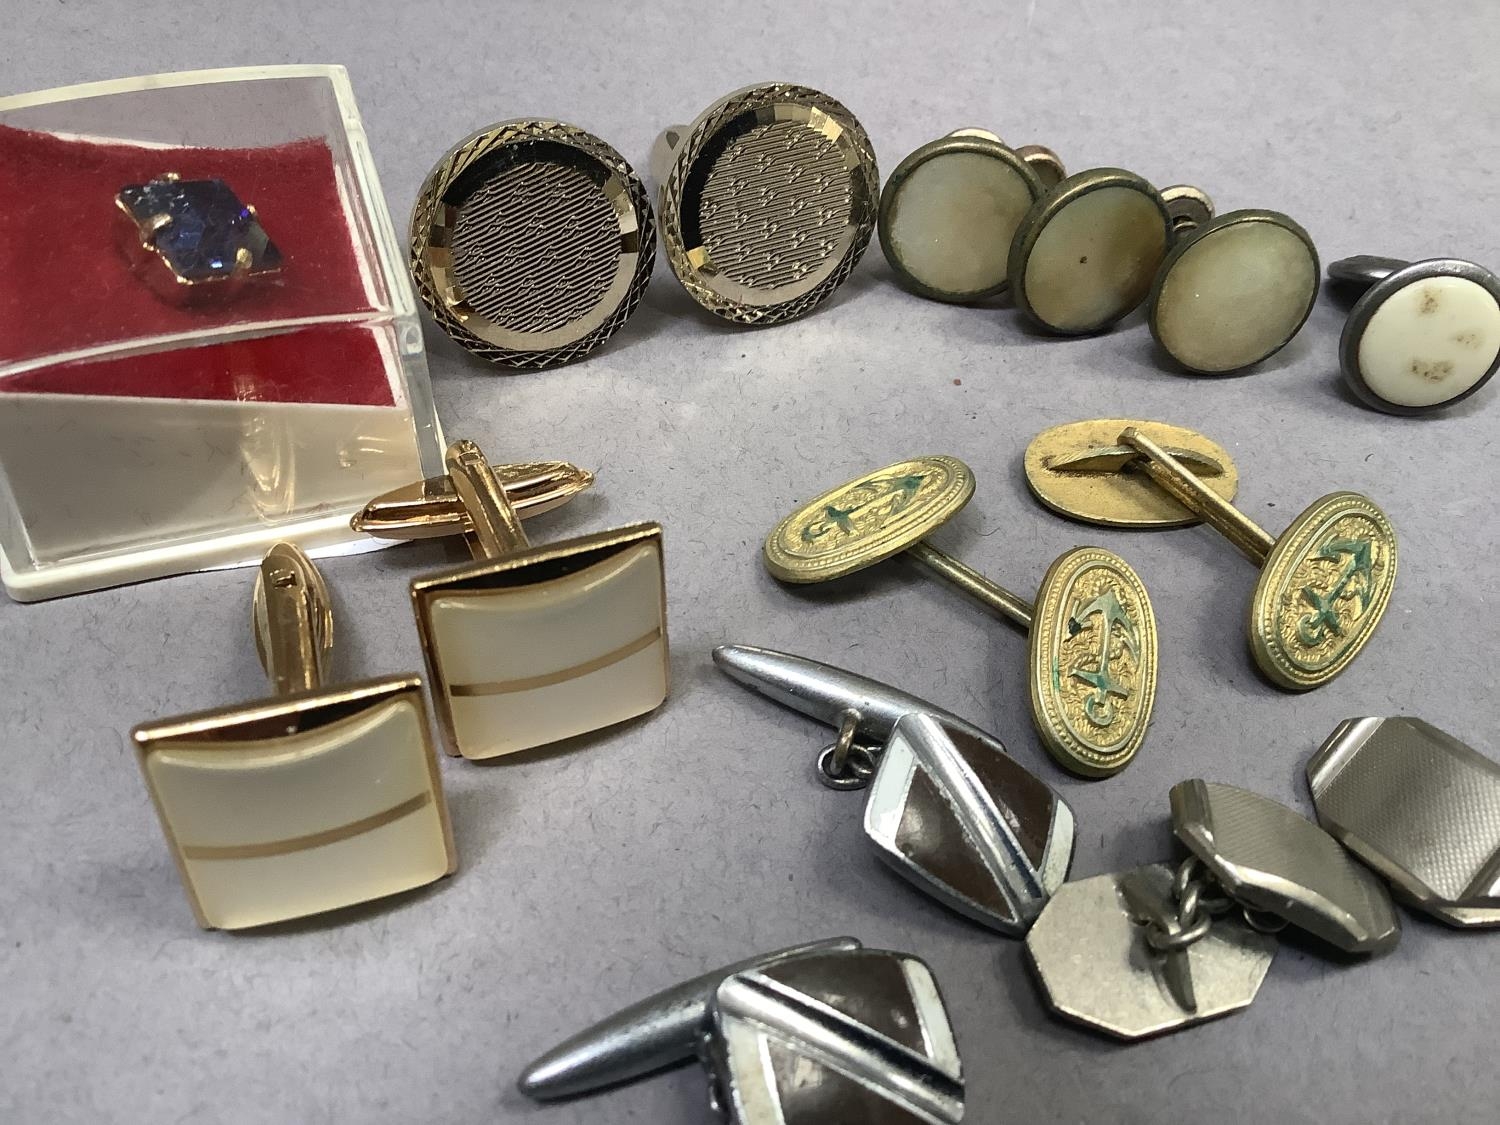 A collection of mid to late 20th century cufflinks and collar and tie tacks